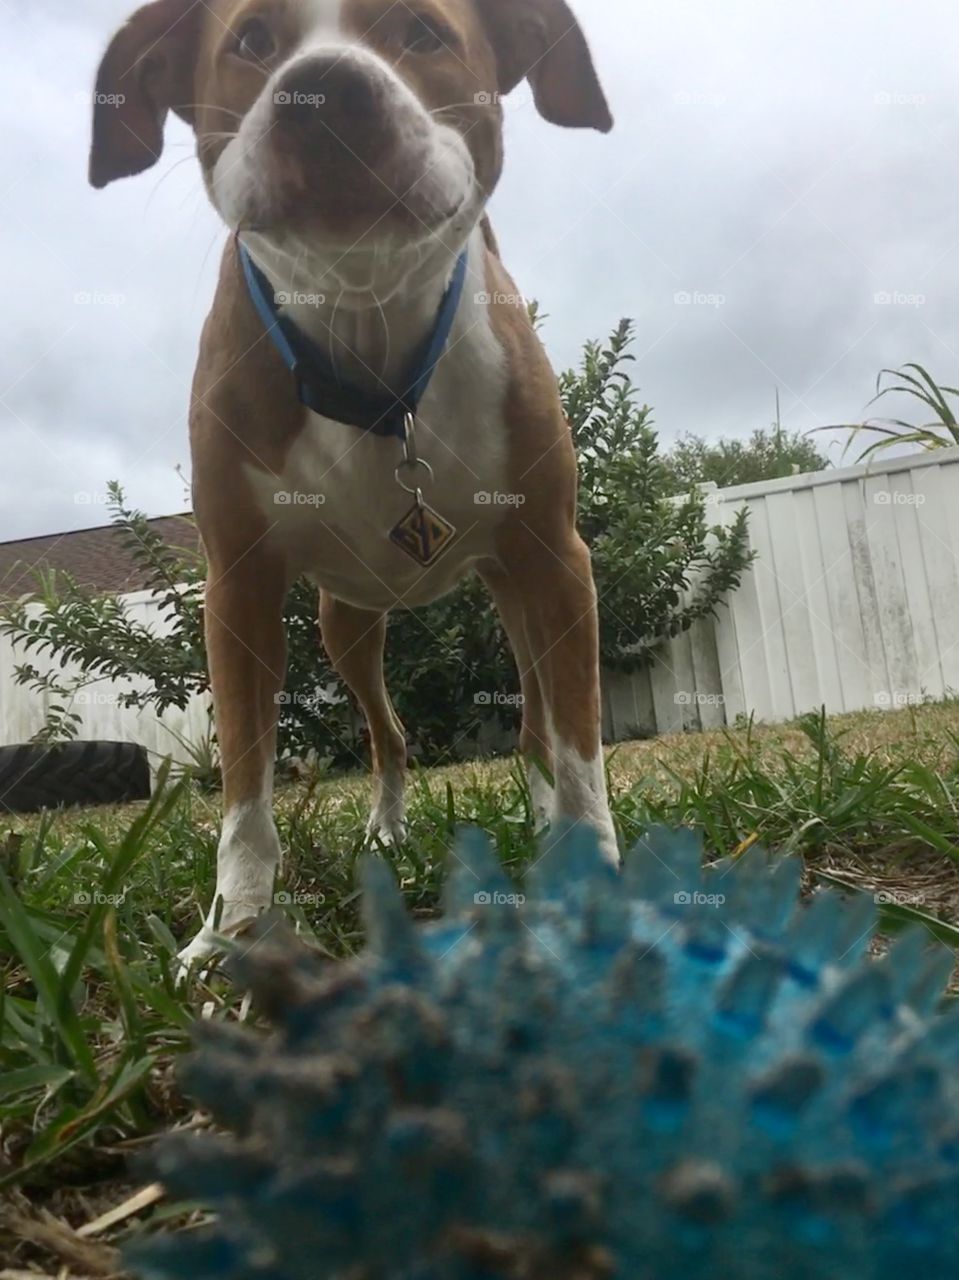 Rescue pitbull all dirty from playing ball with mouth actually closed